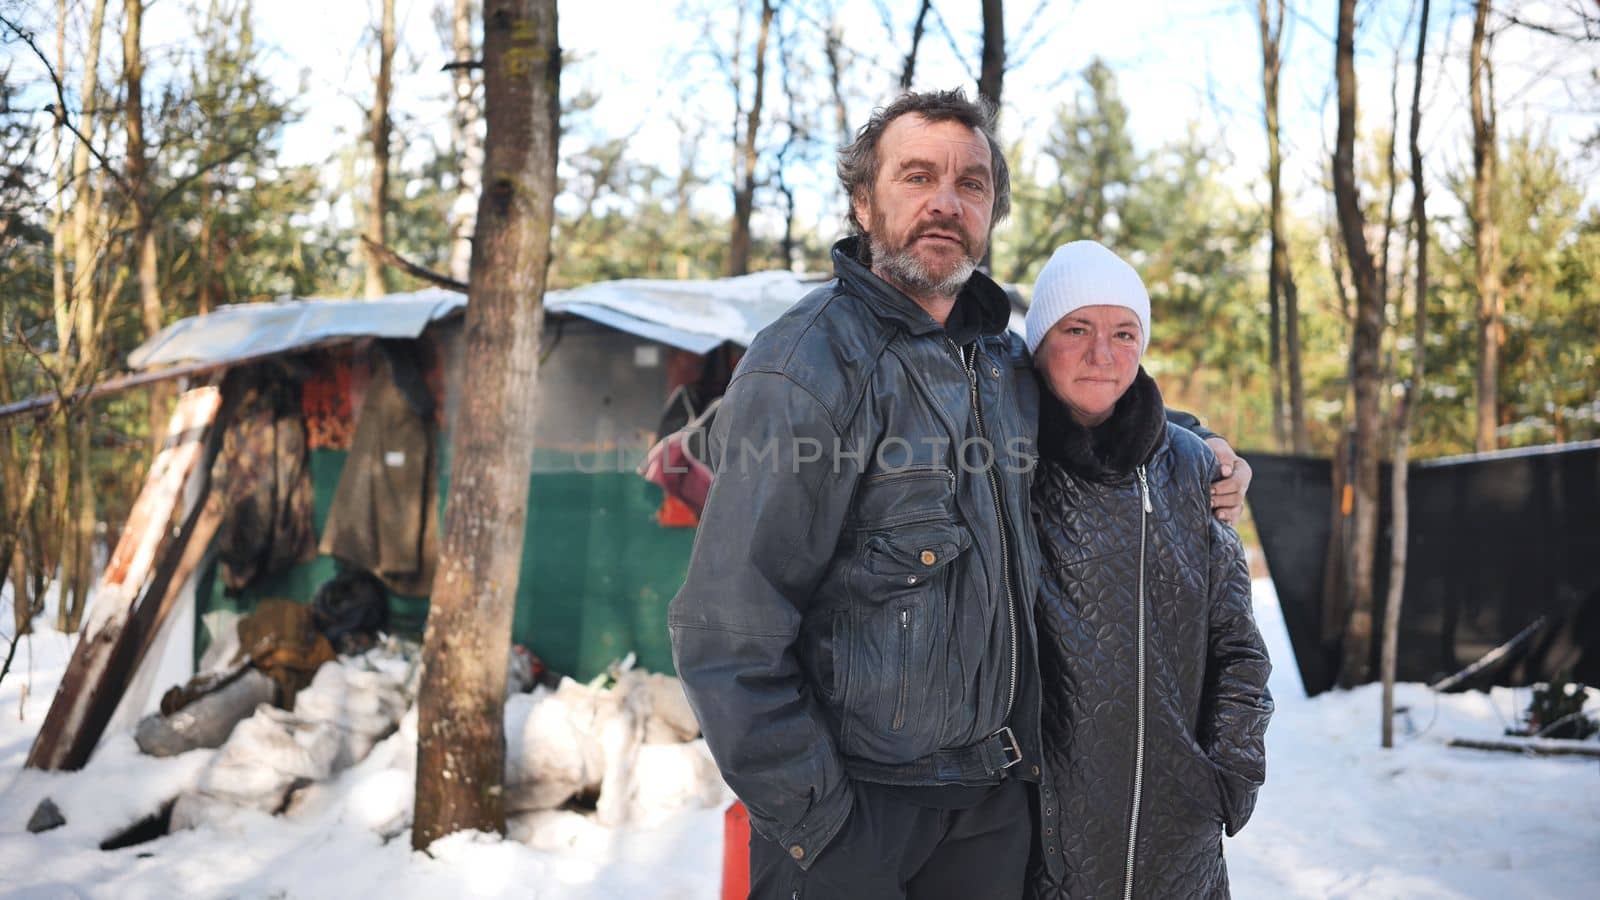 A homeless woman and a man pose in the woods in winter. by DovidPro